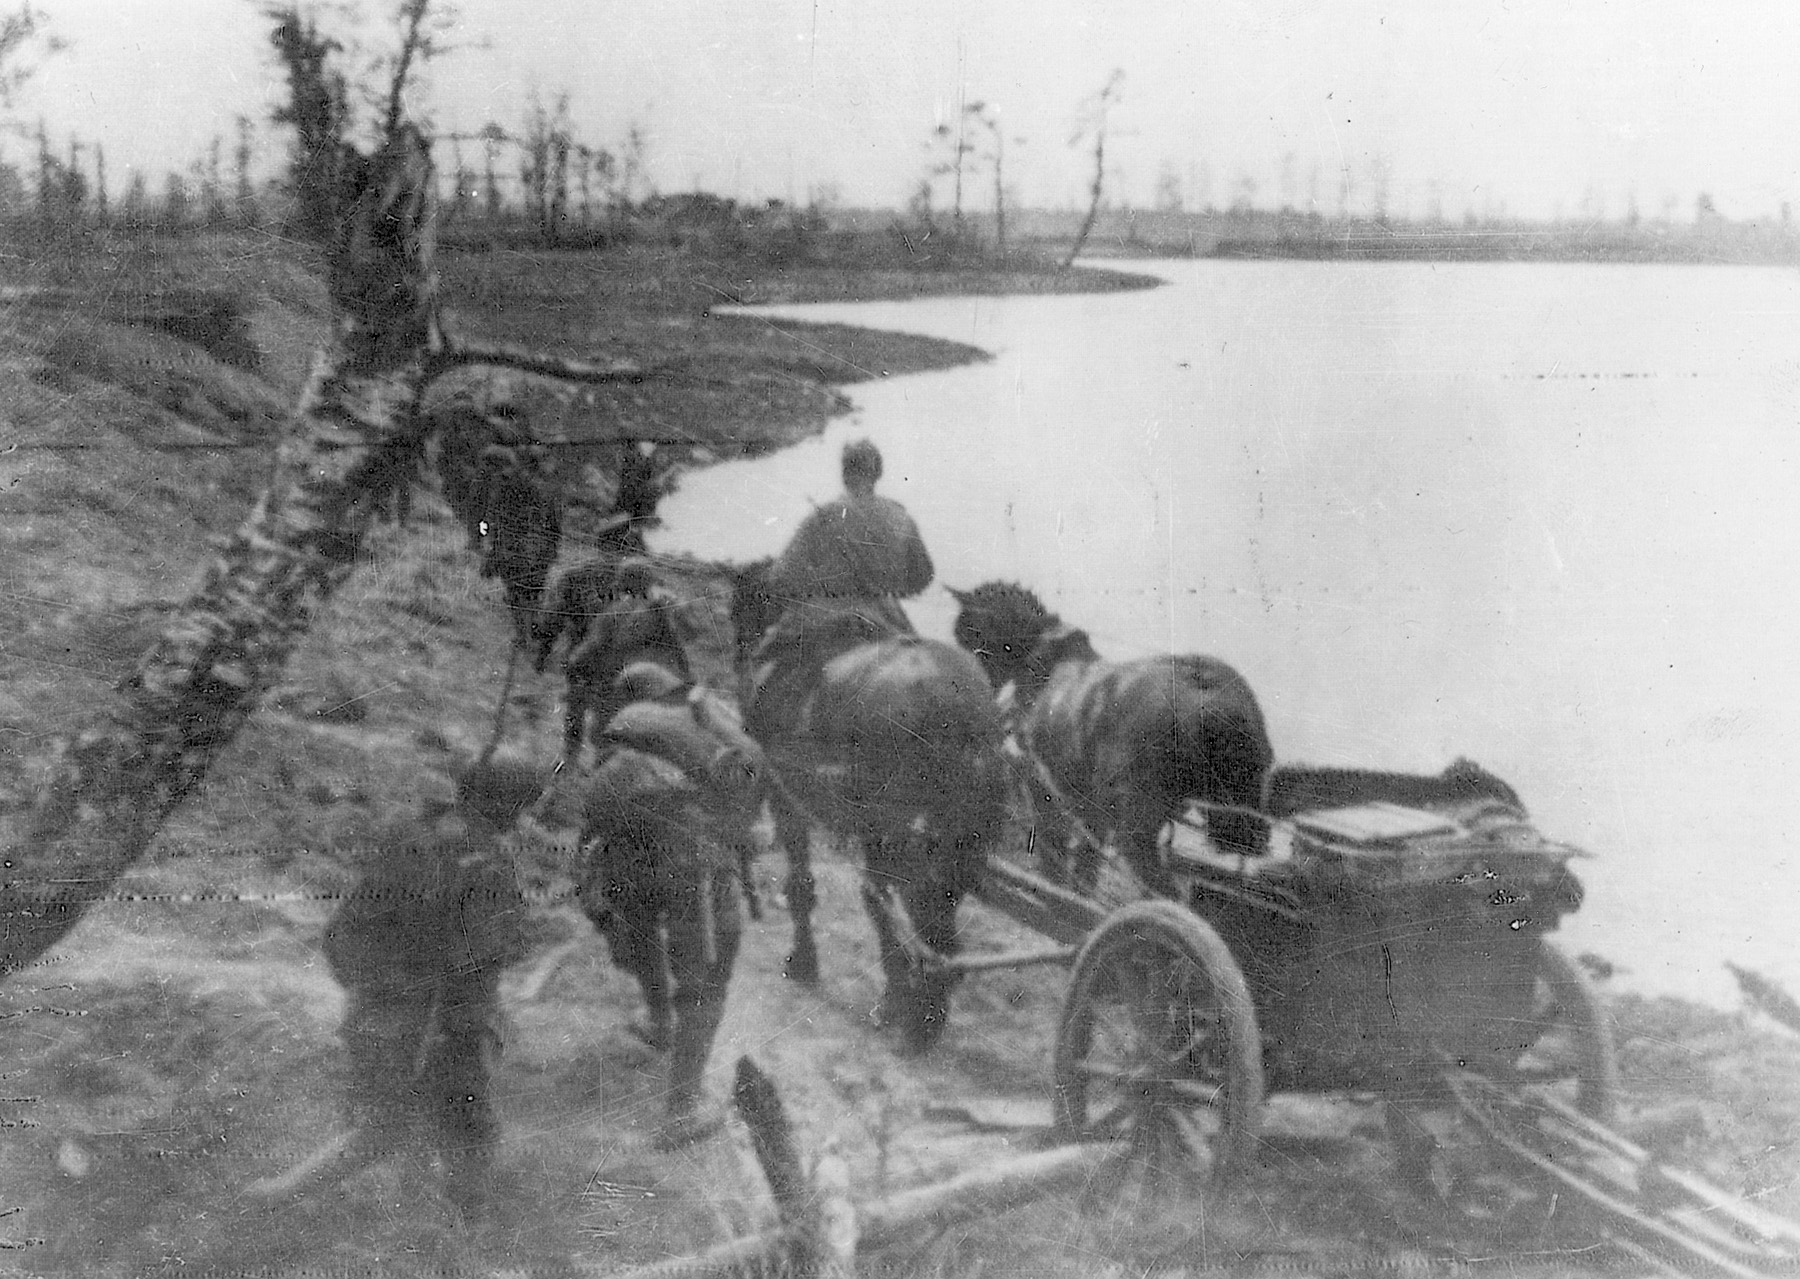 Russian troops move equipment along the banks of a river on the Karelian Isthmus. Fighting the Germans and the Finns, the Red Army was successful in keeping the vital Murmansk supply route open.